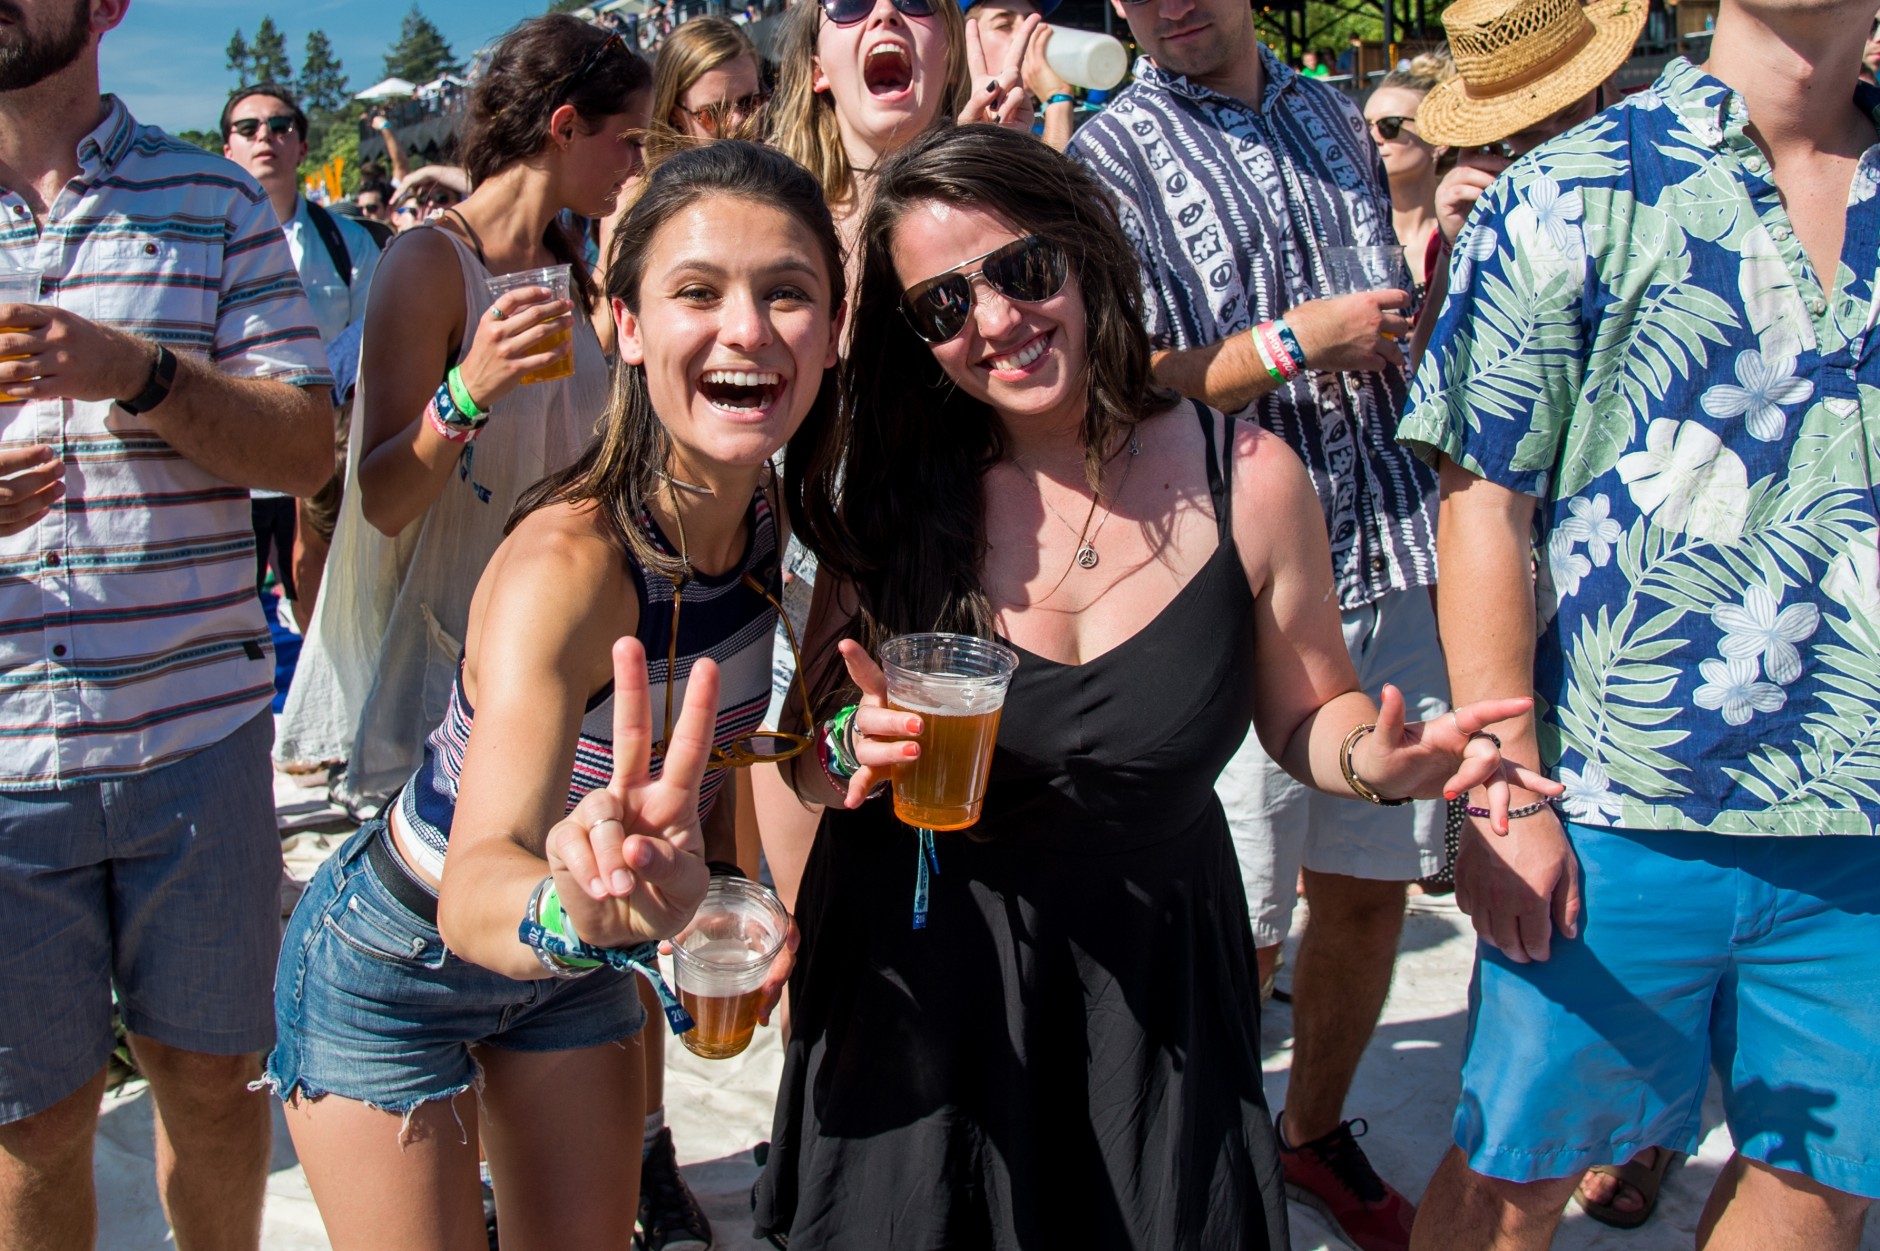 Festival goers dance to Walk The Moon at BottleRock Napa Valley Music Festival at Napa Valley Expo on Saturday, May 28, 2016, in Napa, Calif. (Photo by Amy Harris/Invision/AP)